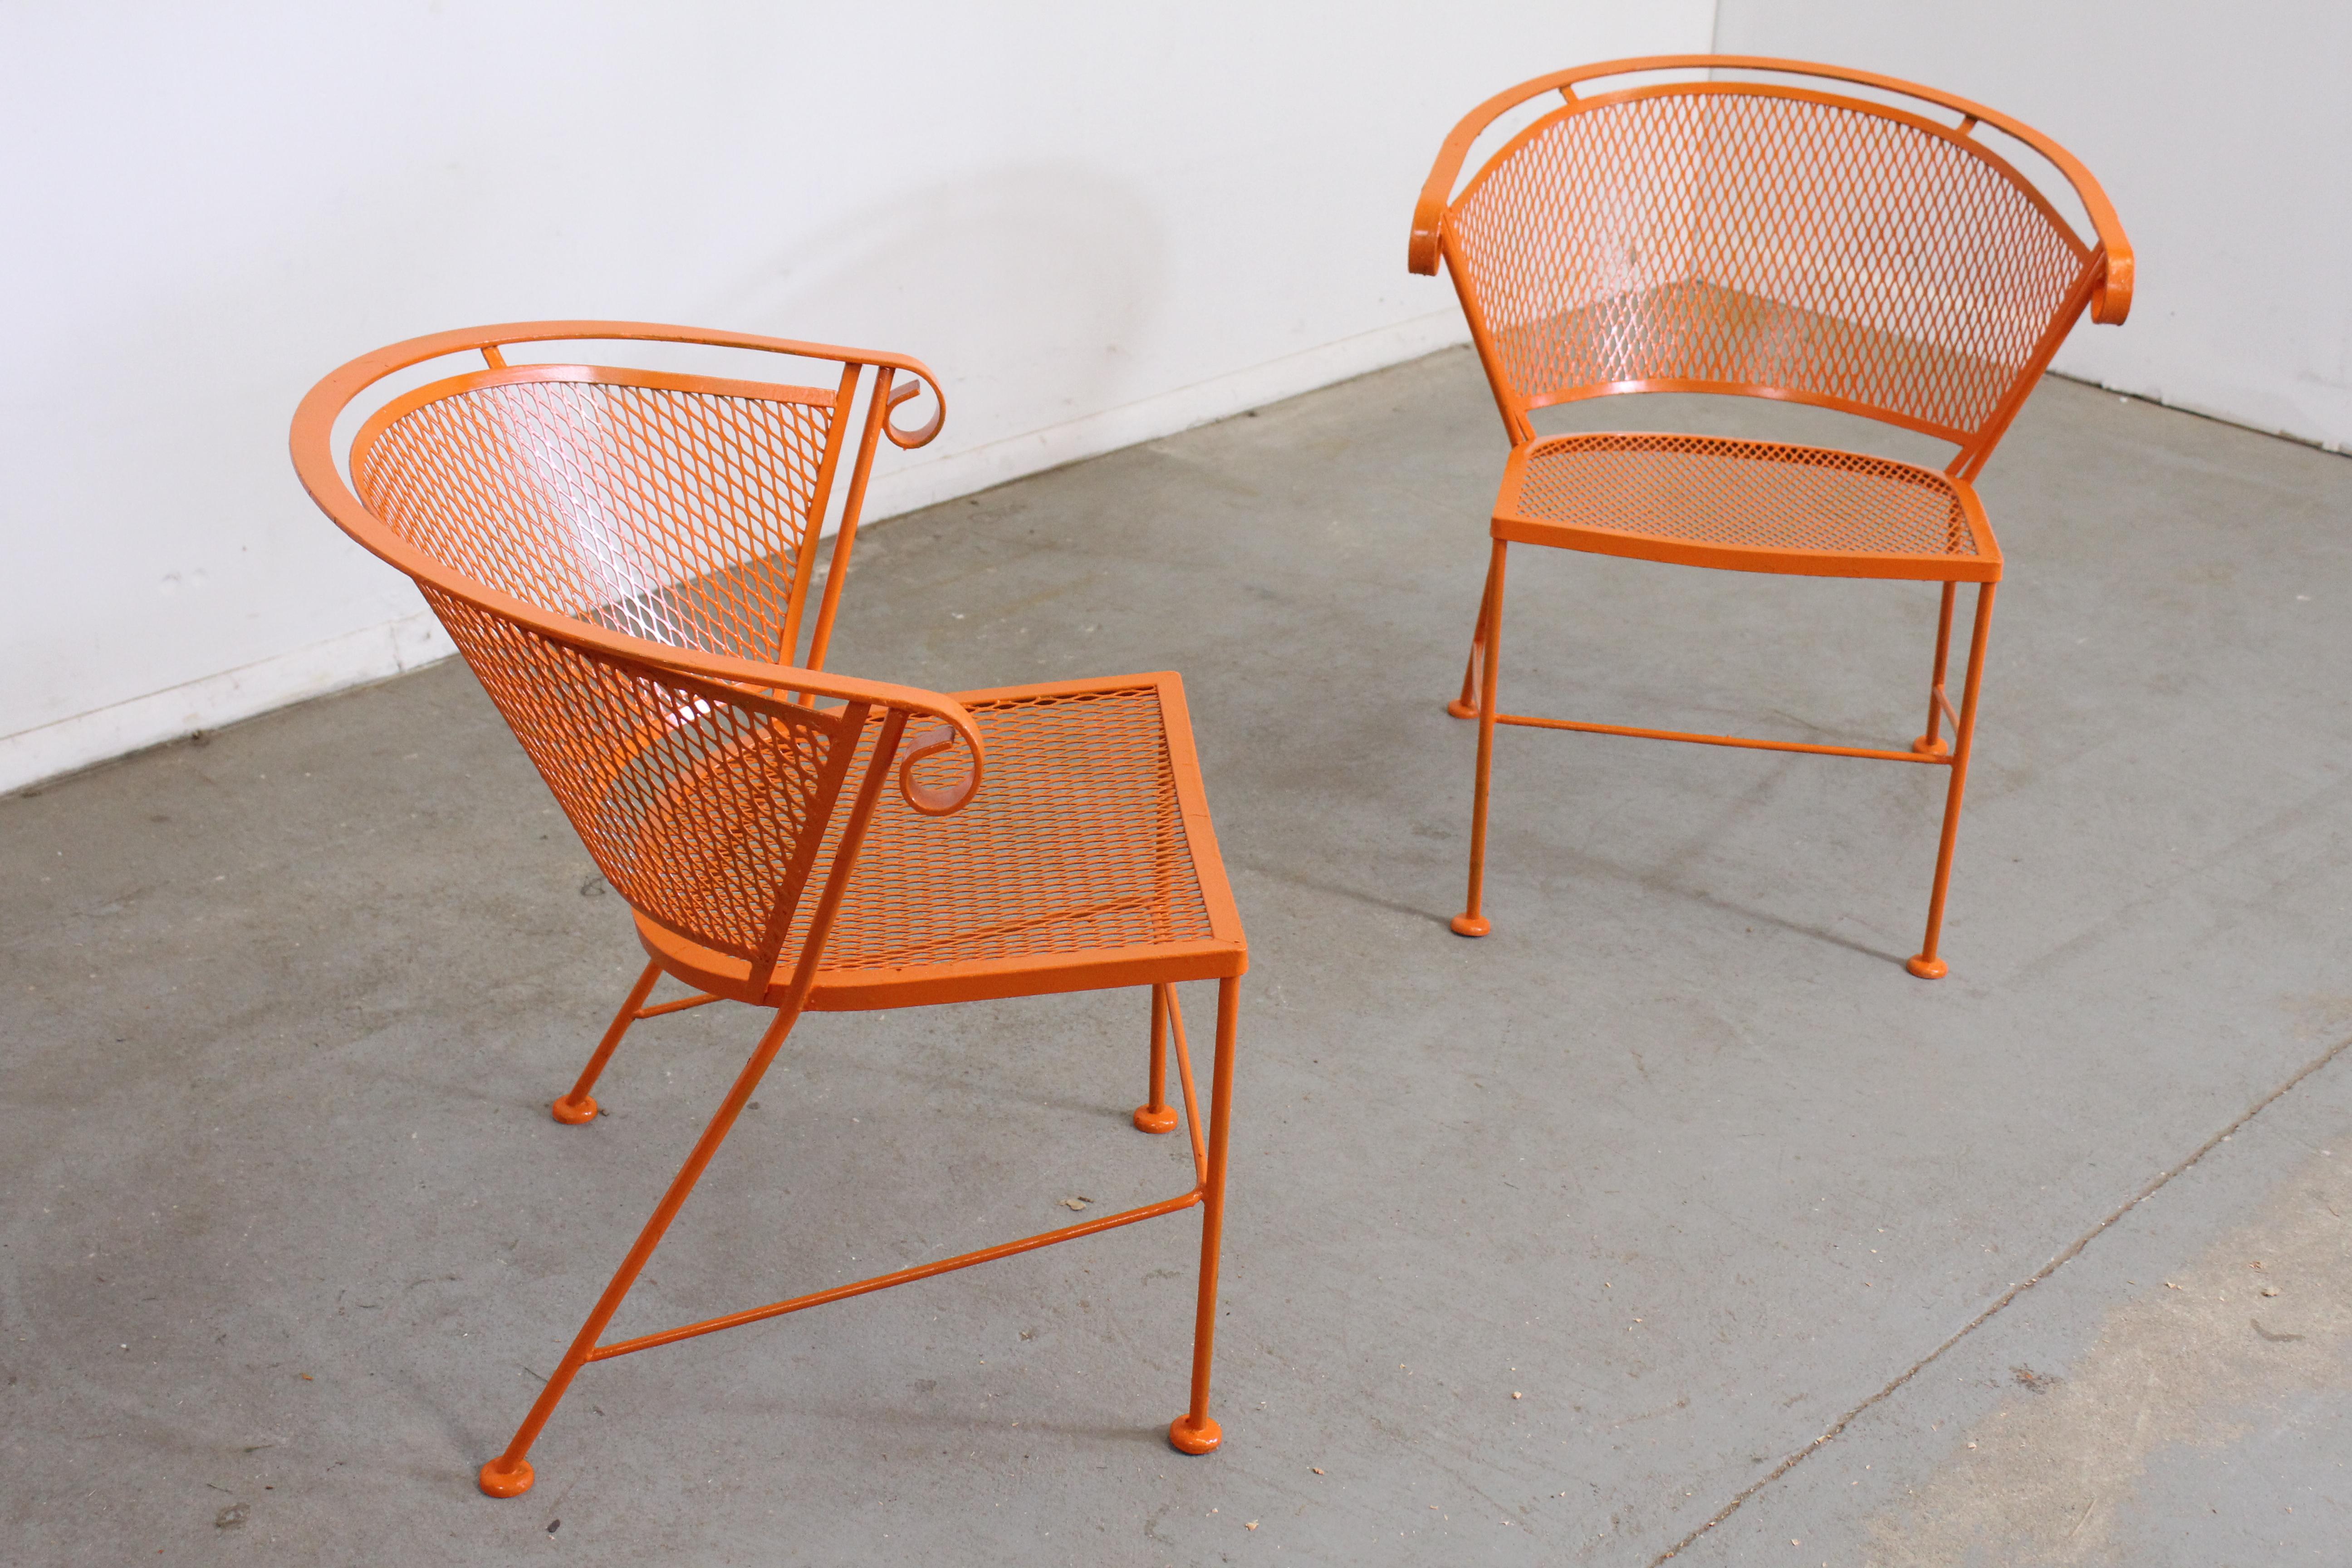 Pair of Mid-Century Modern Atomic orange outdoor metal curved back chairs

Offered is a pair of Pair of Mid-Century Modern Atomic orange outdoor metal curved back chairs, circa 1968. These chairs swivel and rock, and have been repainted in an